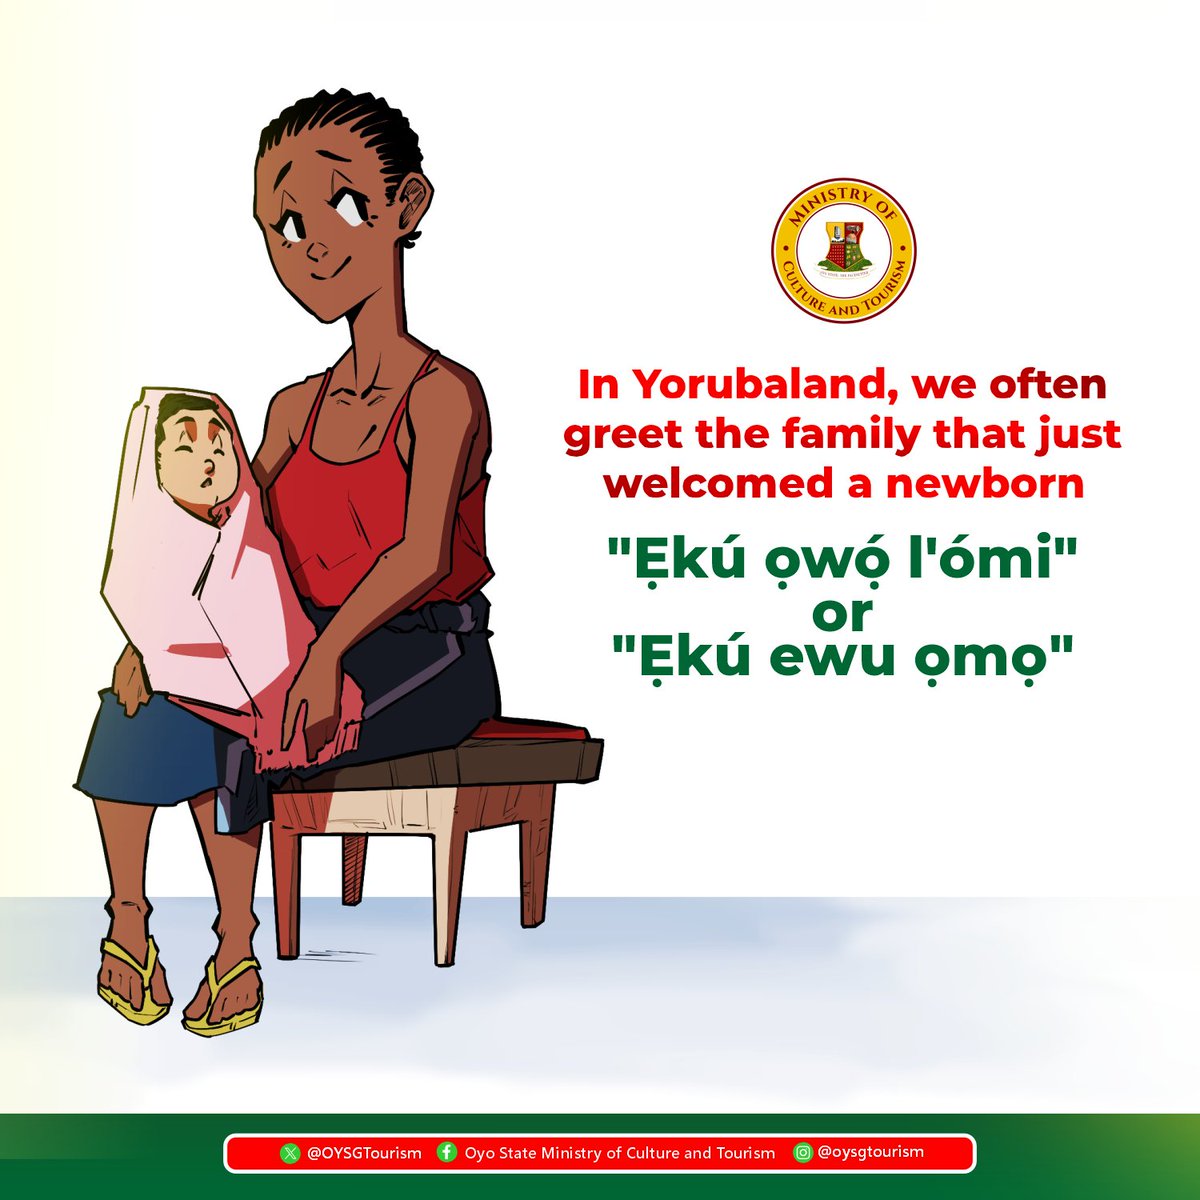 What are some other Yoruba greetings you know for this special occasion? Share them in the comments!